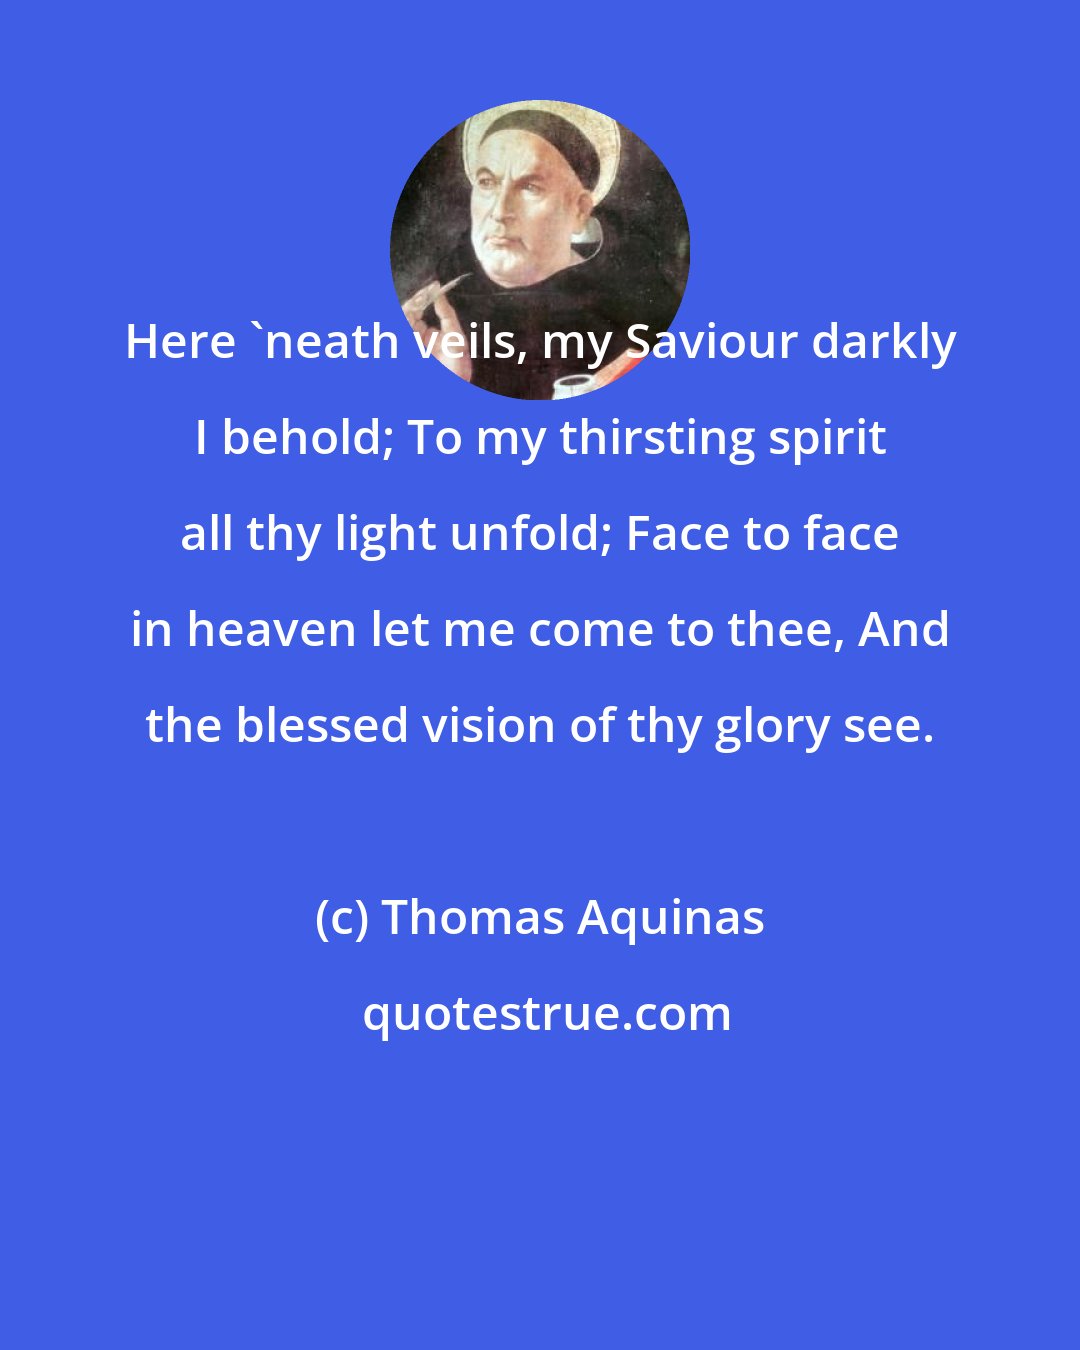 Thomas Aquinas: Here 'neath veils, my Saviour darkly I behold; To my thirsting spirit all thy light unfold; Face to face in heaven let me come to thee, And the blessed vision of thy glory see.